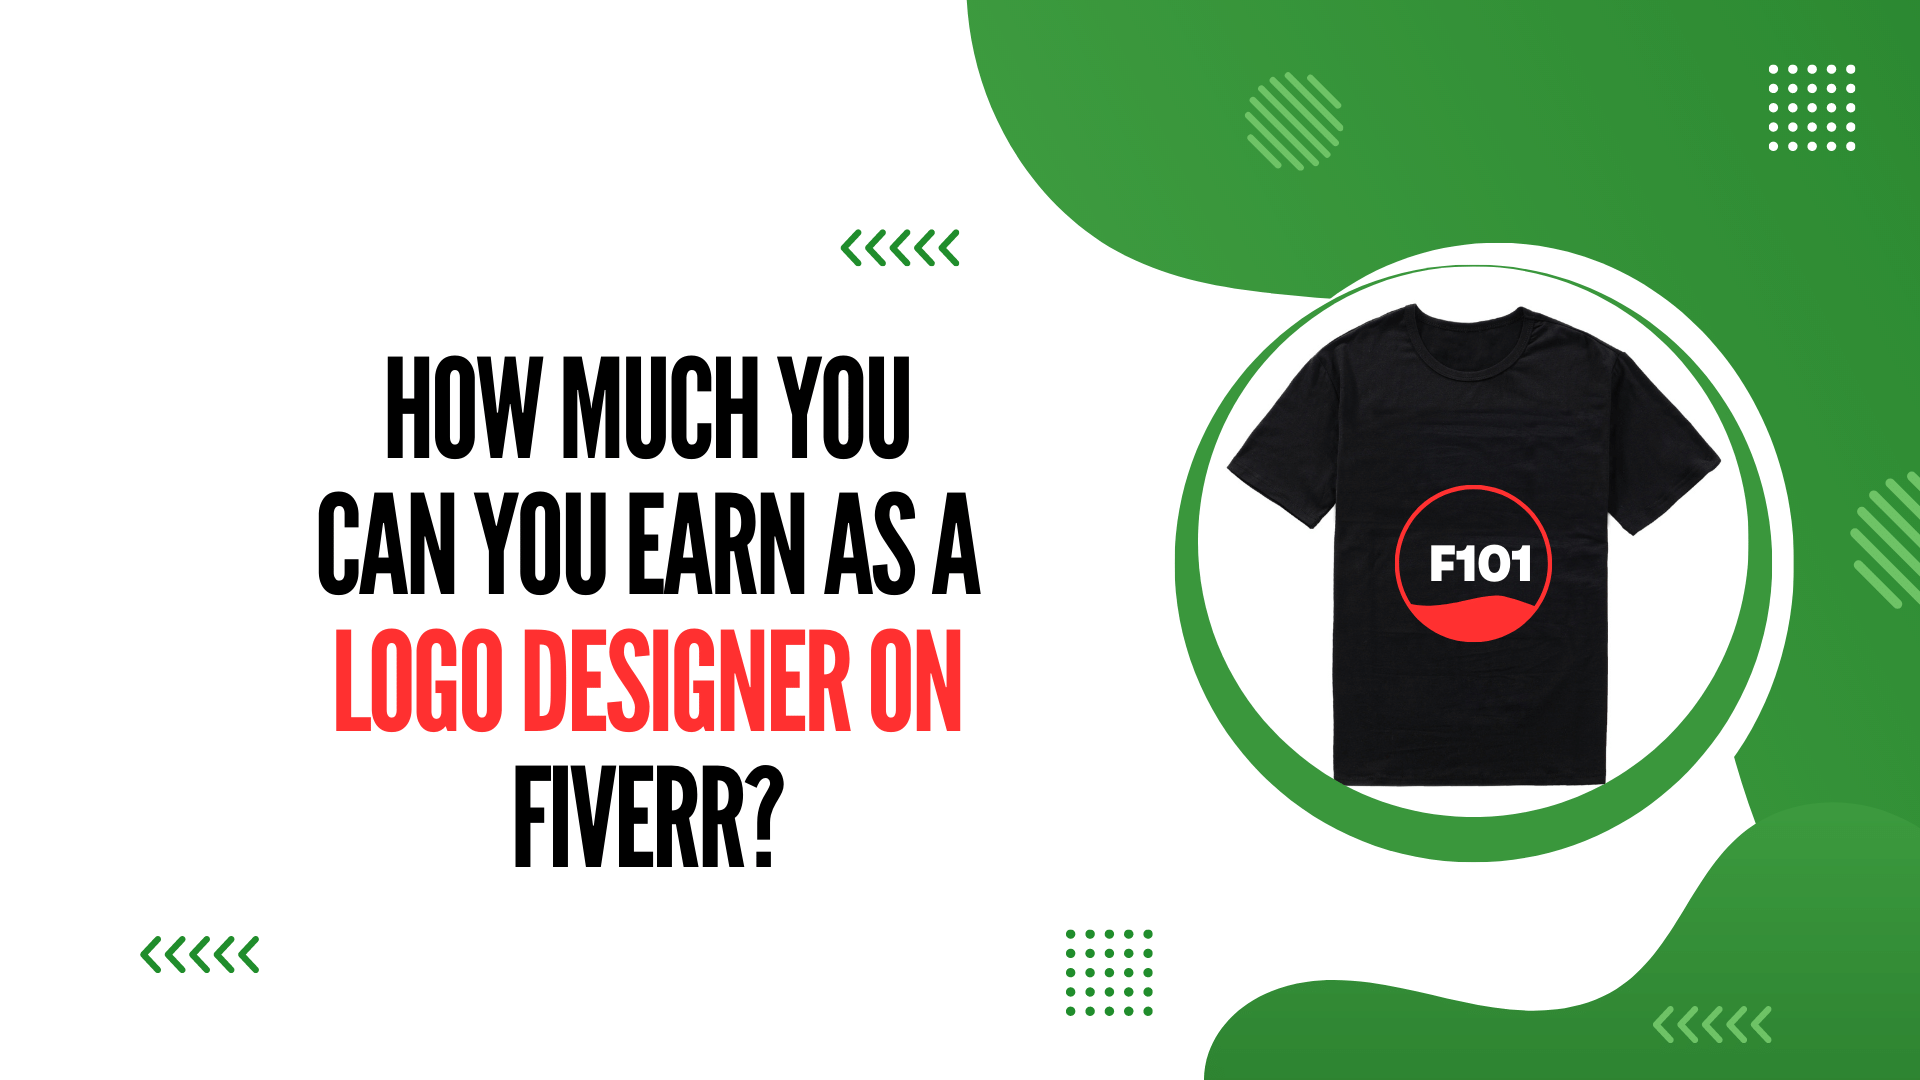 How Much Can You Earn as a Logo Designer on Fiverr